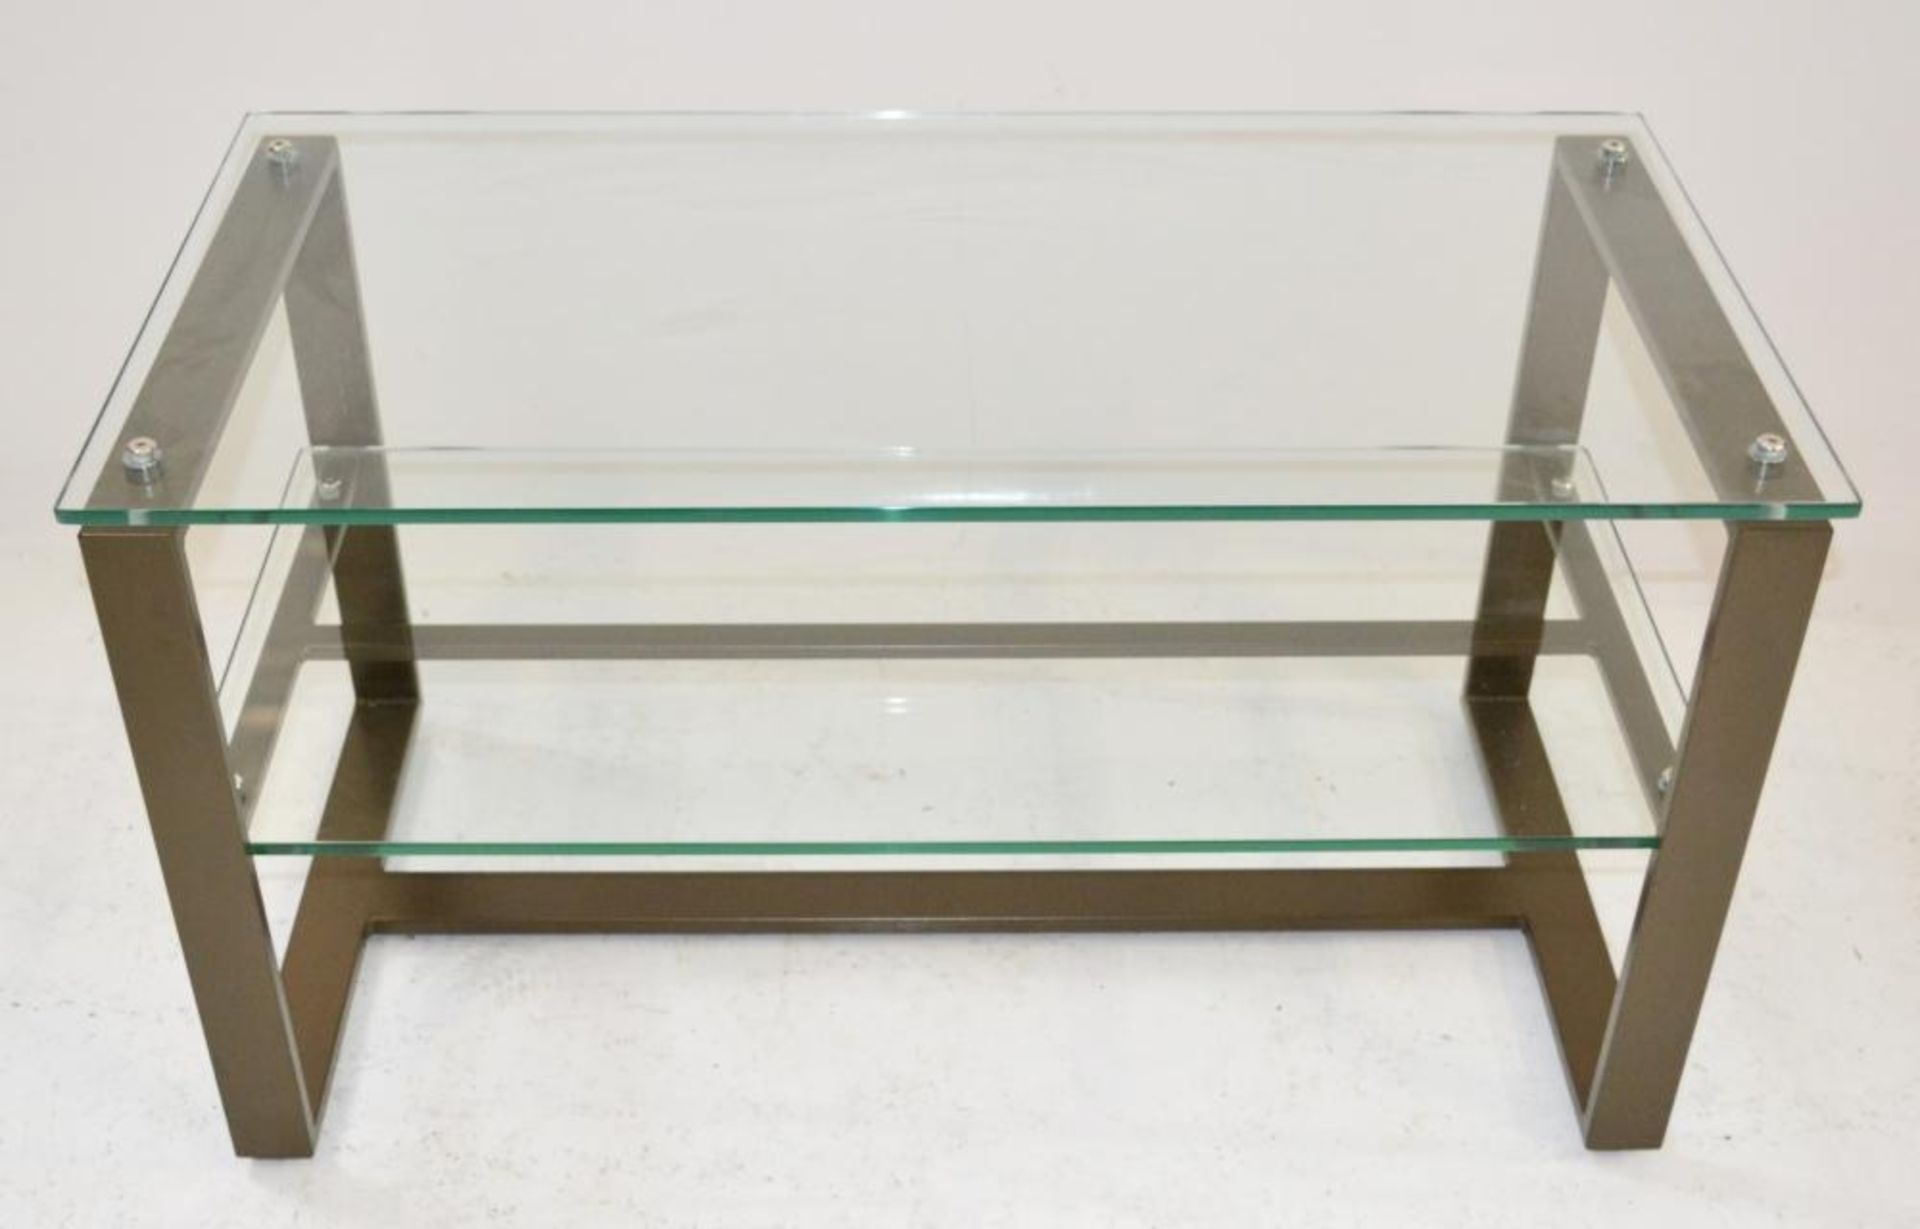 8 x Small Contemporary Retail Glass Display Units With Sturdy Metal Frames and Two Shelves - - Image 8 of 8